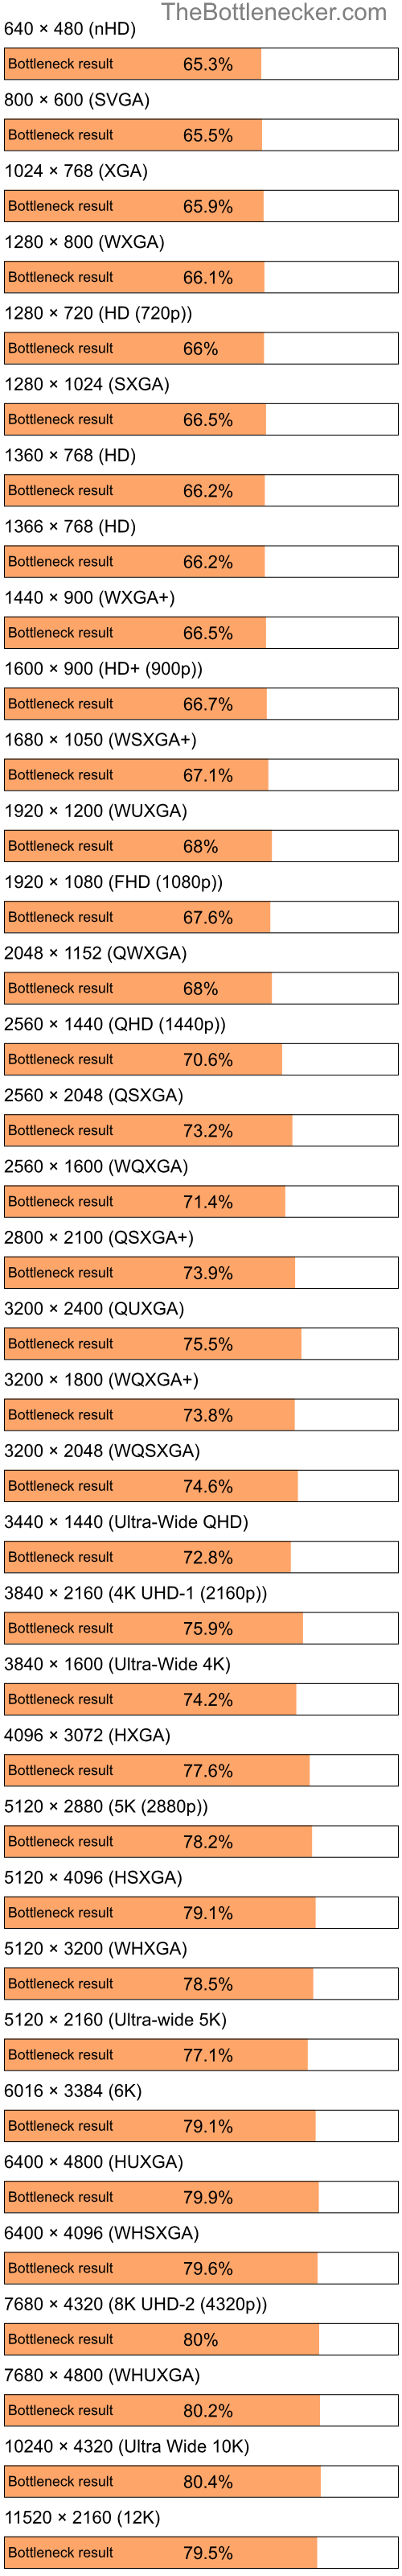 Bottleneck results by resolution for Intel Atom N270 and NVIDIA Quadro NVS 135M in Processor Intense Tasks